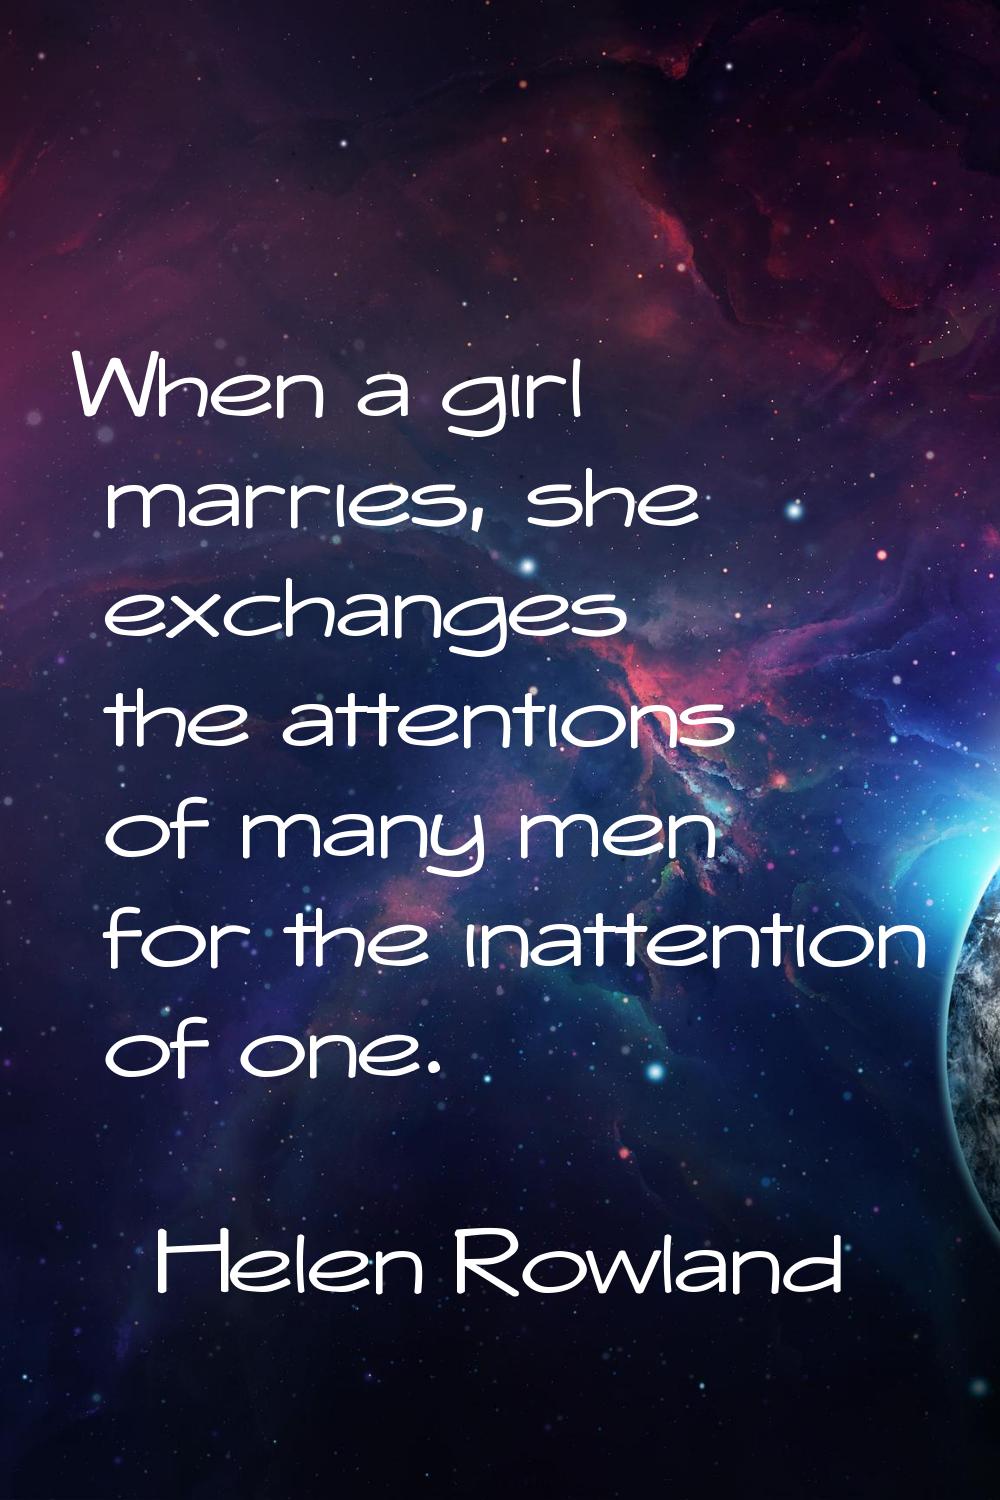 When a girl marries, she exchanges the attentions of many men for the inattention of one.